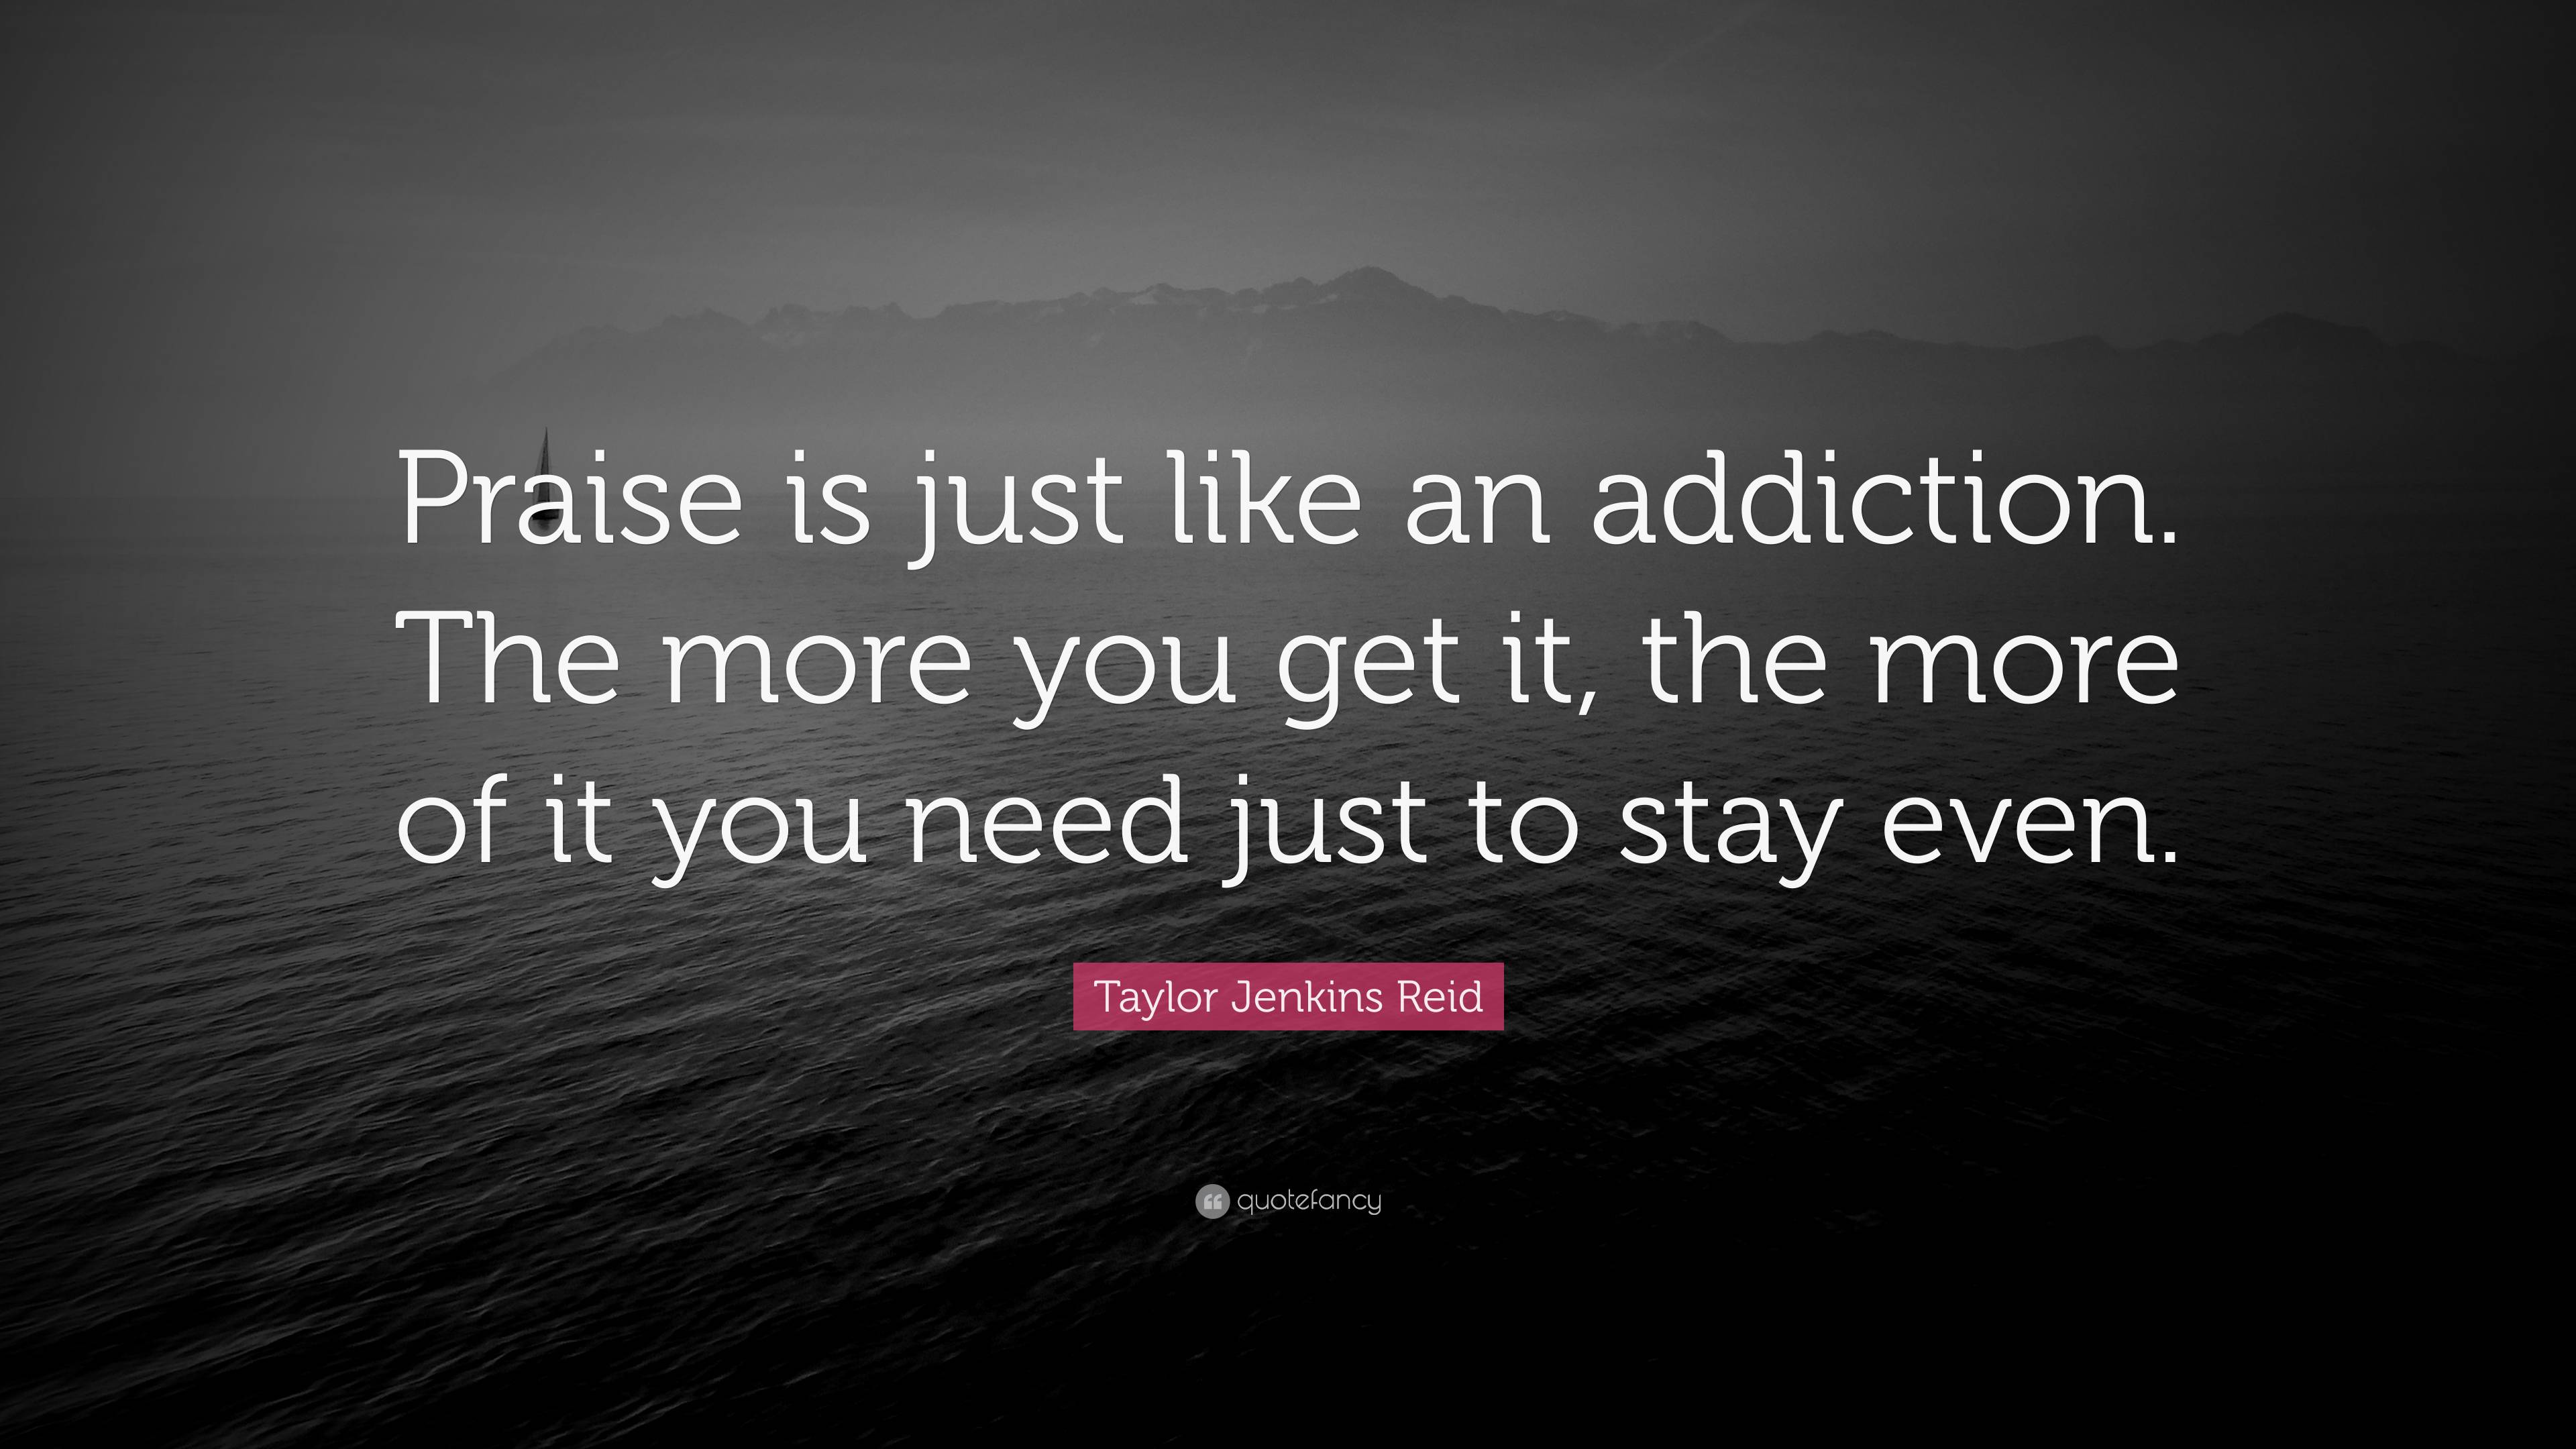 Taylor Jenkins Reid Quote: “Praise is just like an addiction. The